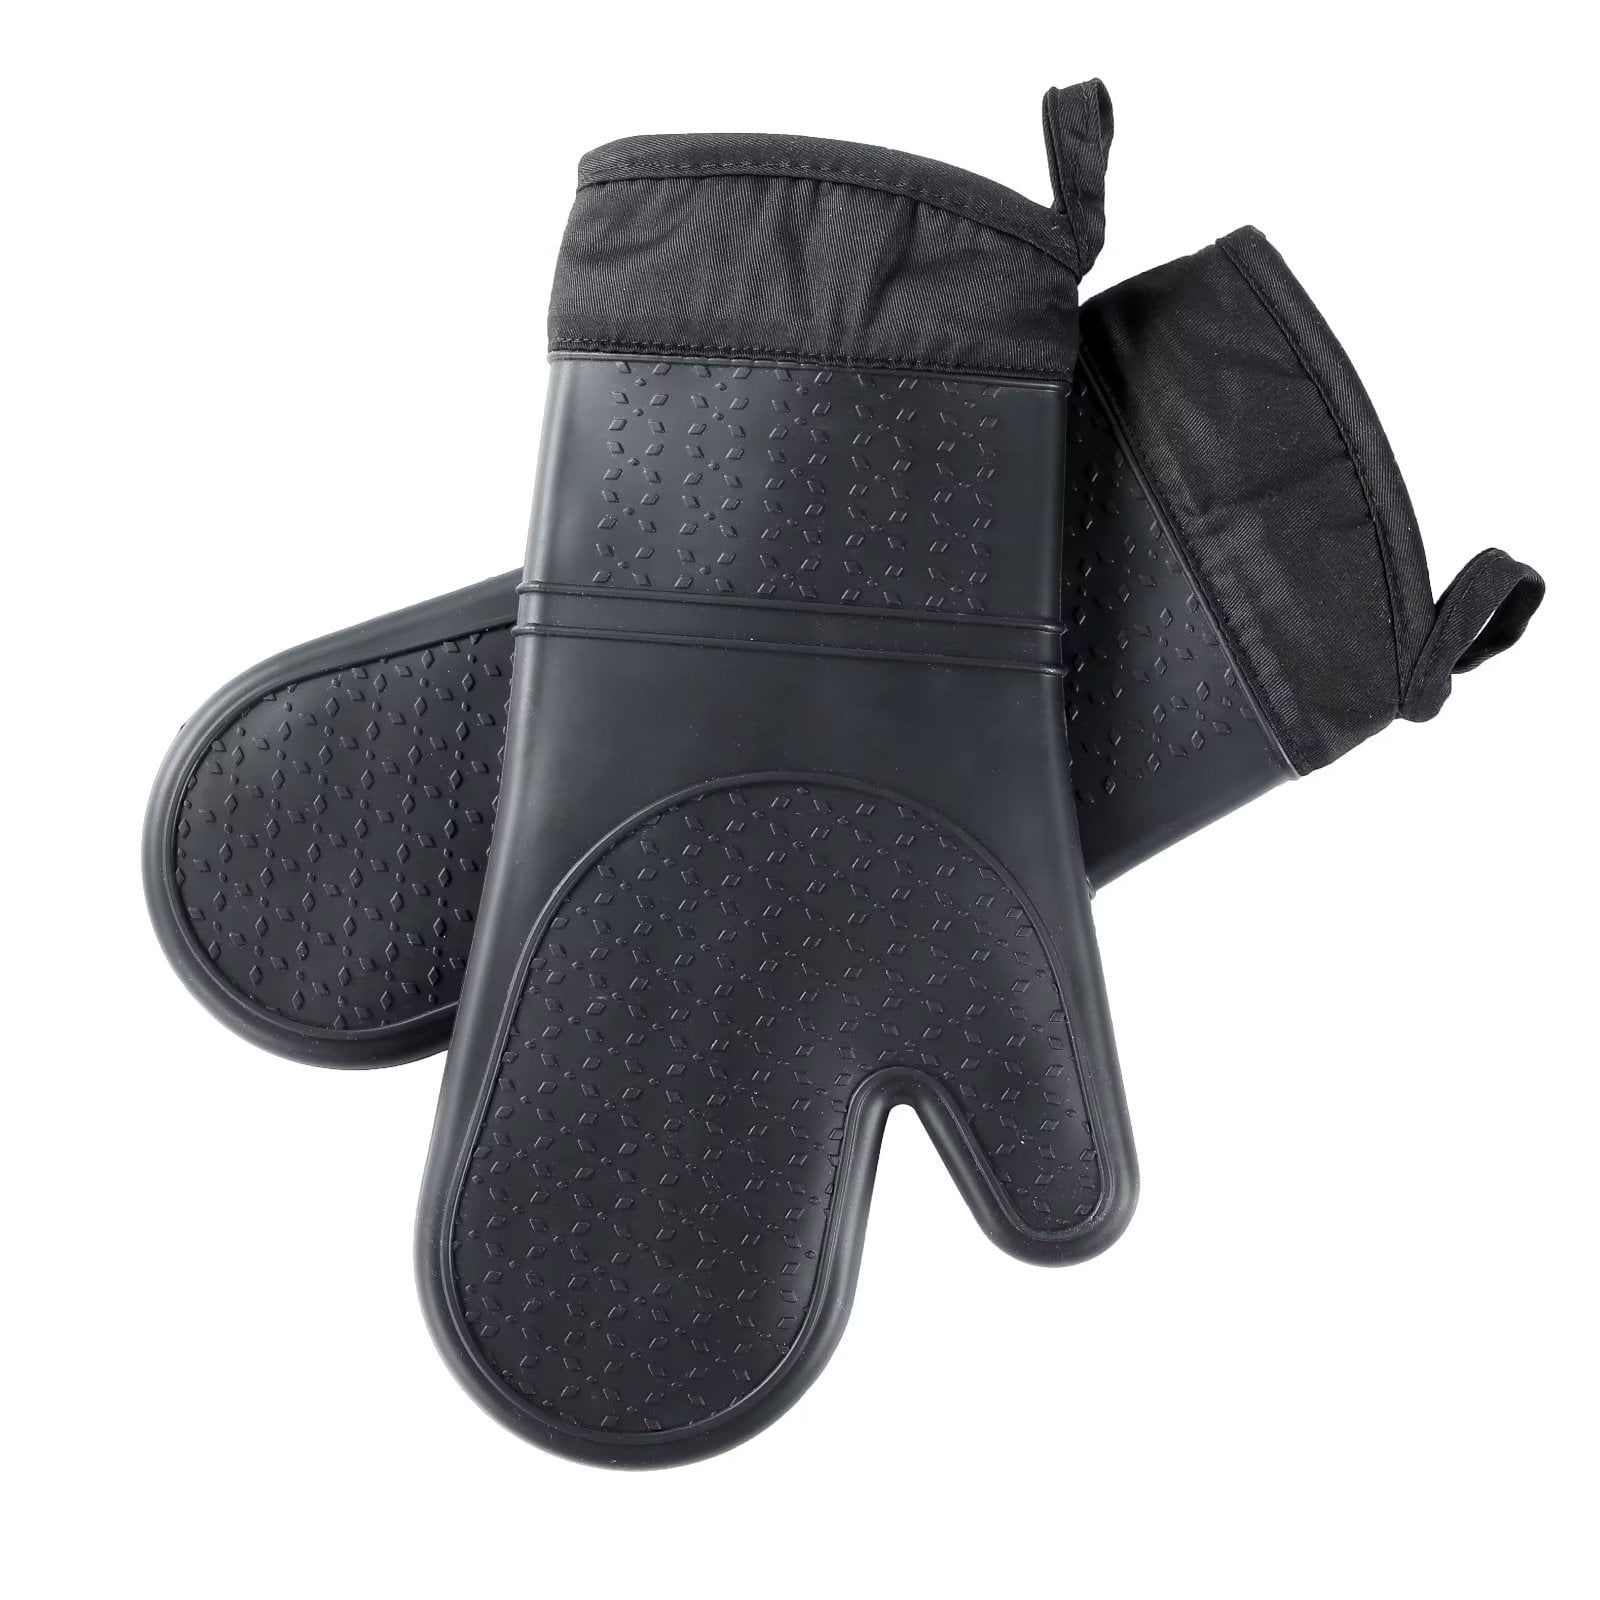 All-Clad Ribbed Silicone Cotton Twill Oven Mitt, Set of 2 - Black